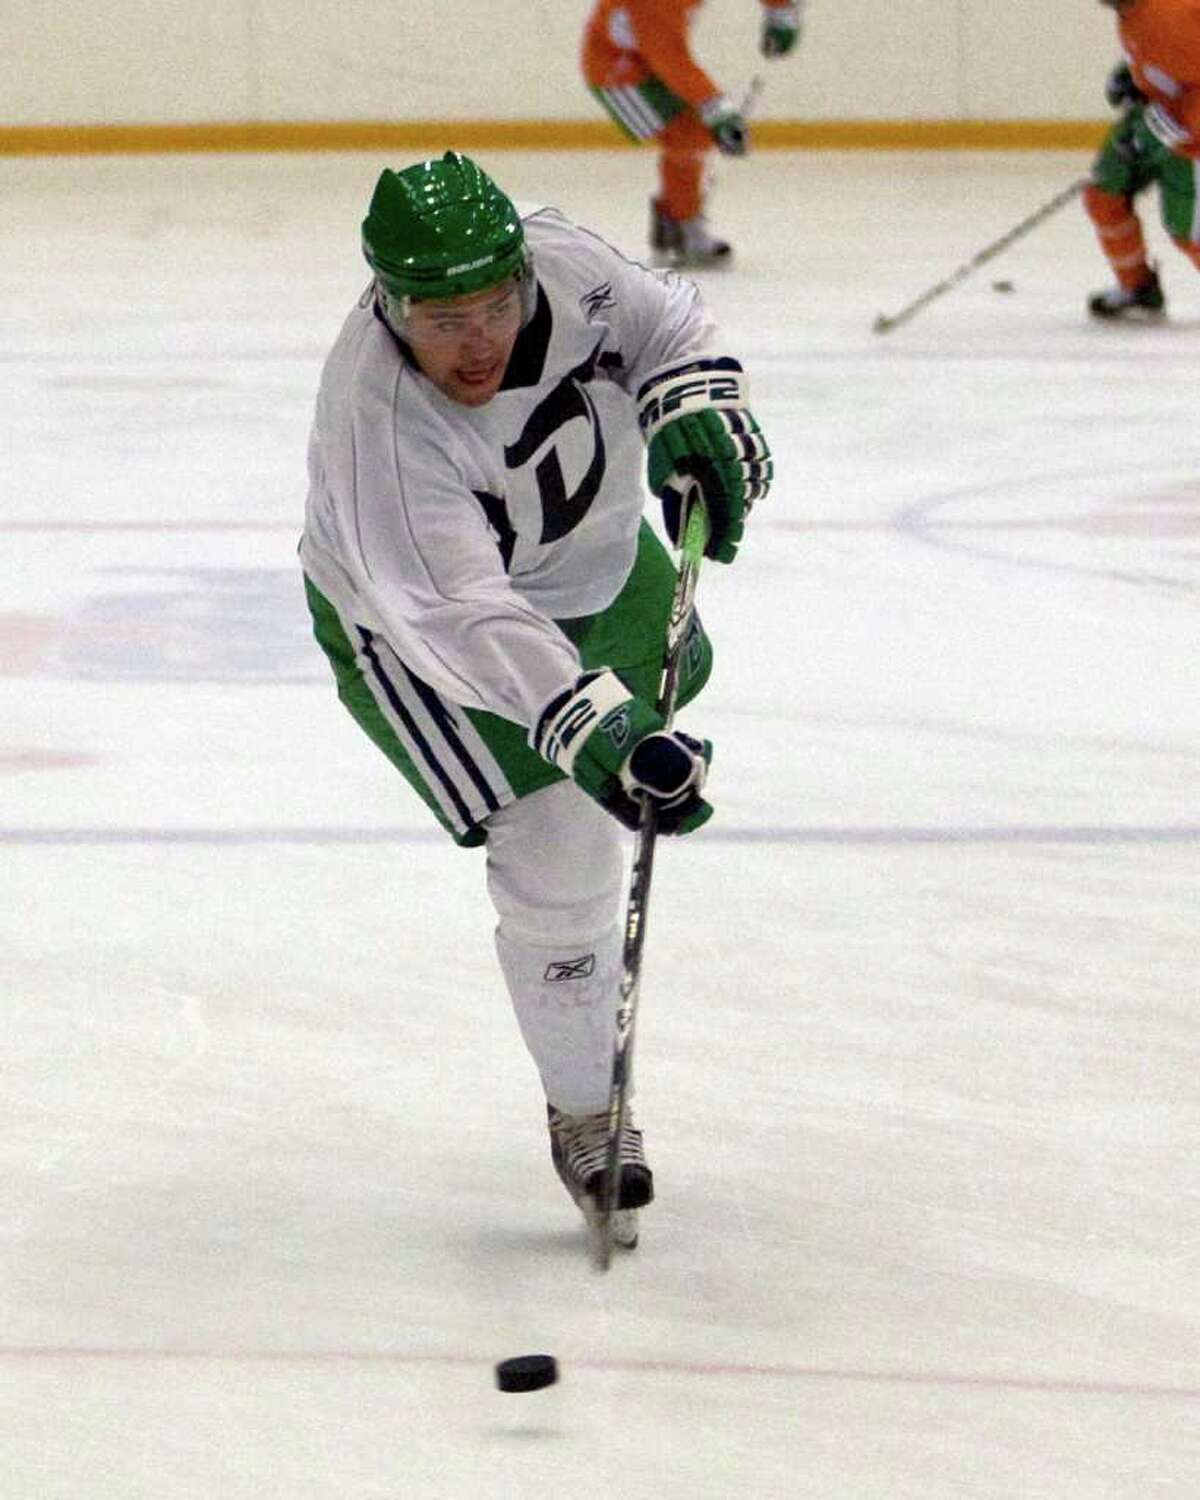 The Whalers' Devon Guy fires a shot during practice Thursday at the Danbury Ice Arena.